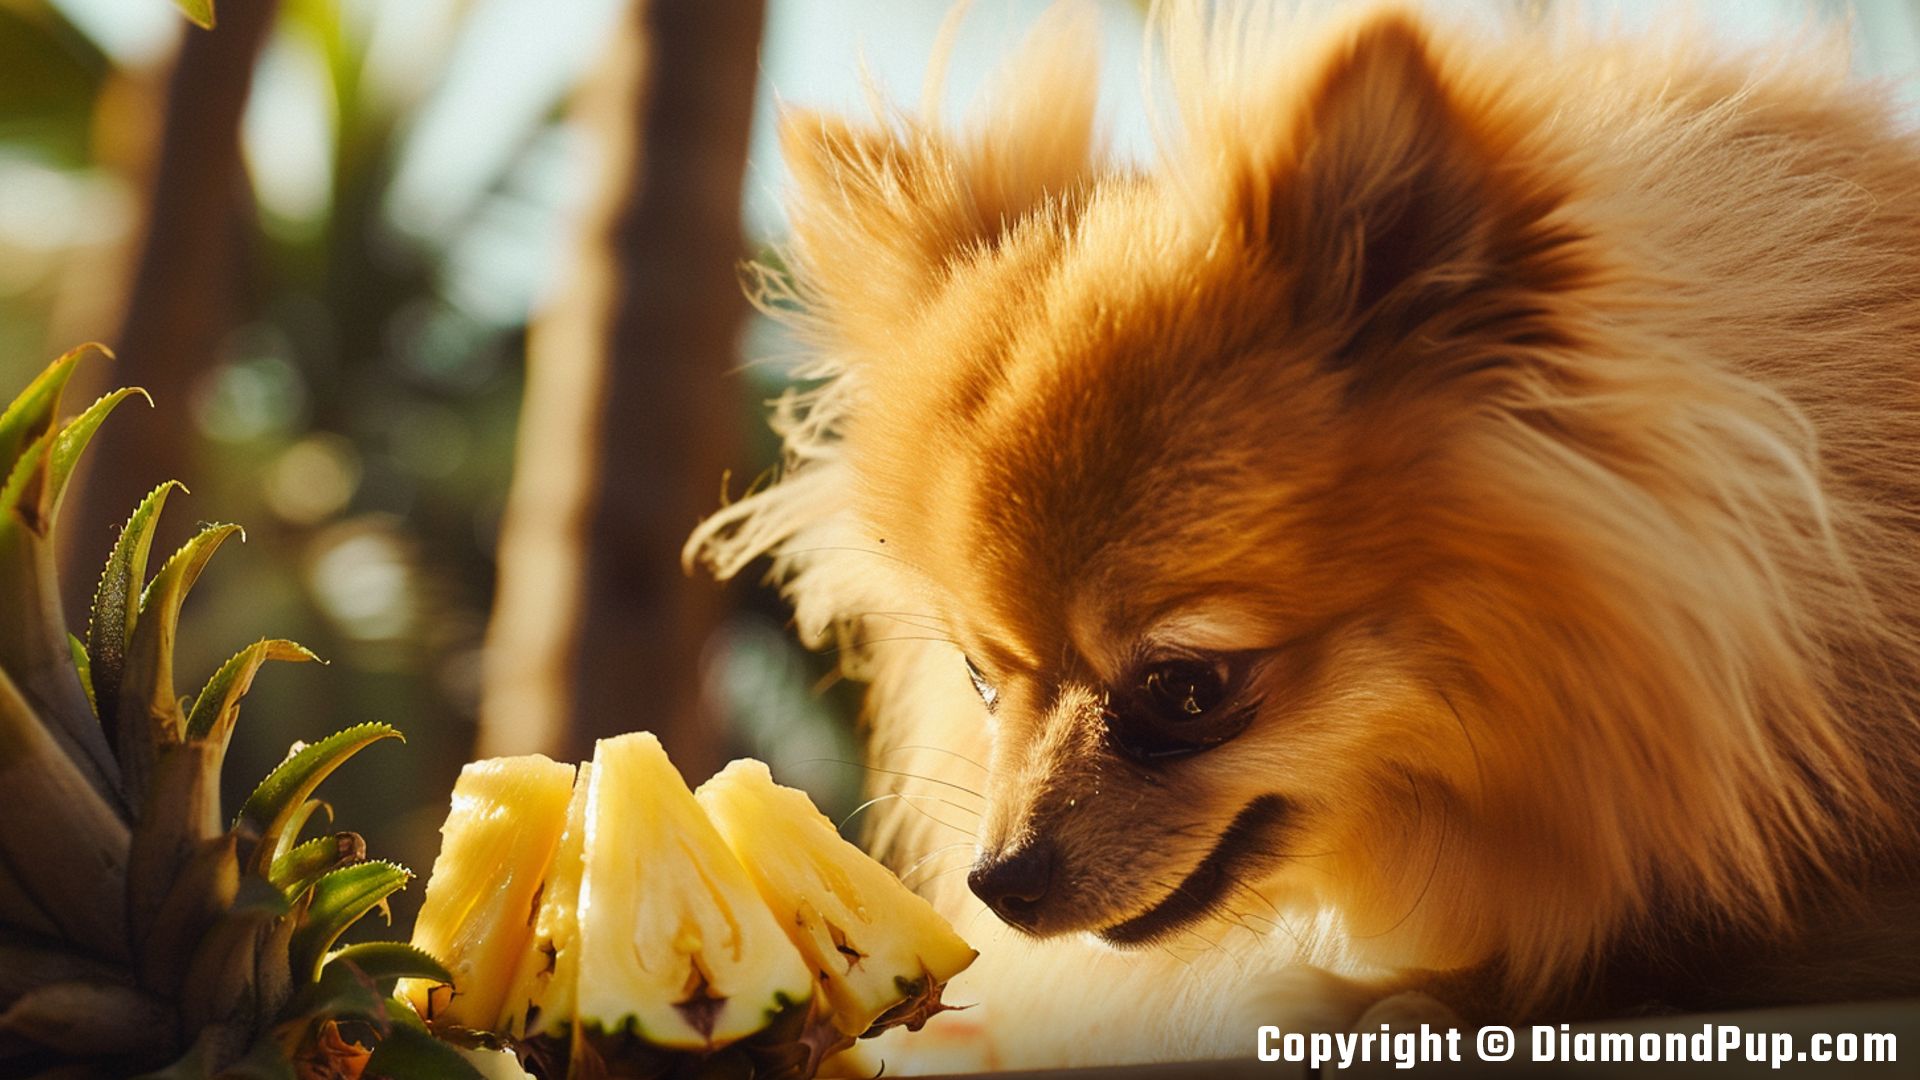 Image of a Playful Pomeranian Snacking on Pineapple